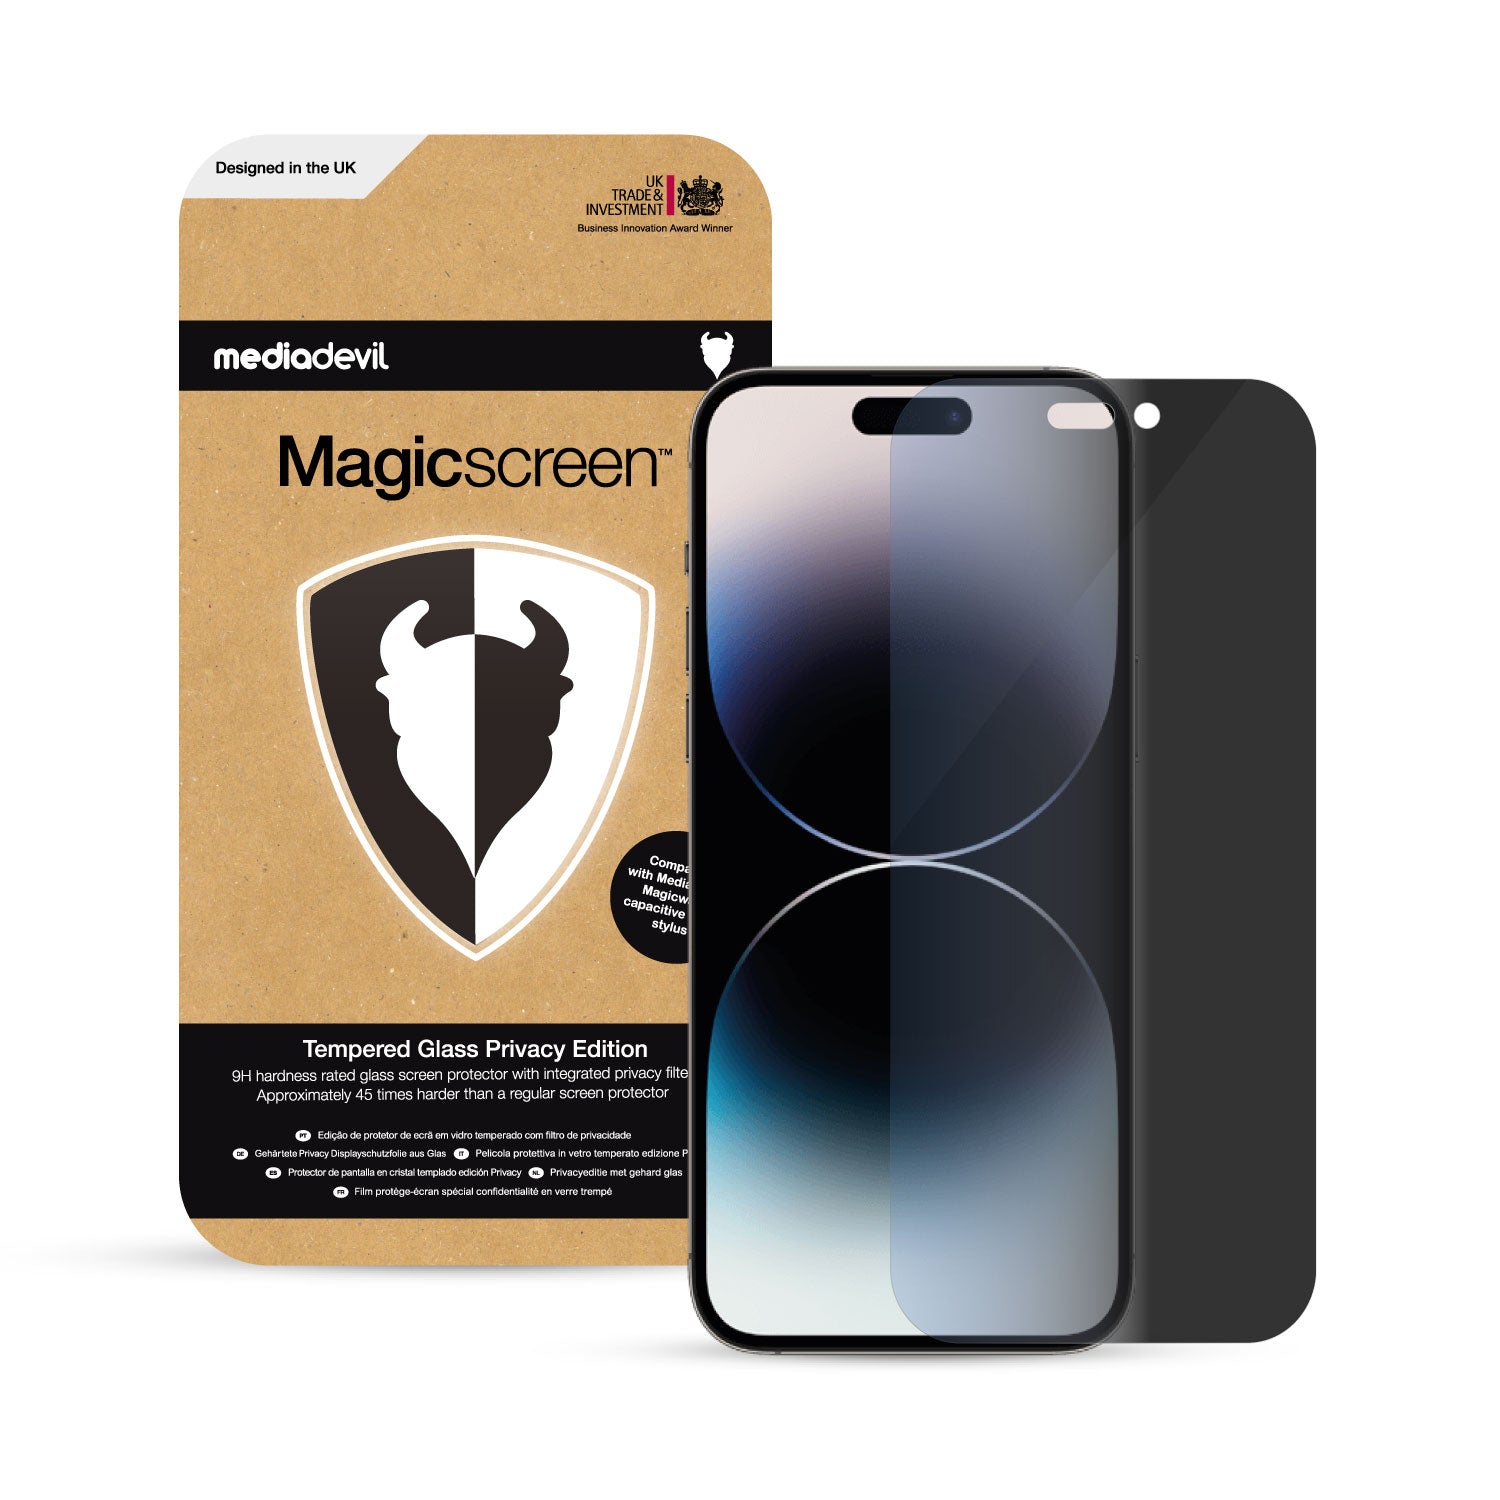 Anti-Shock tempered glass film for iPhone 13 Pro Max